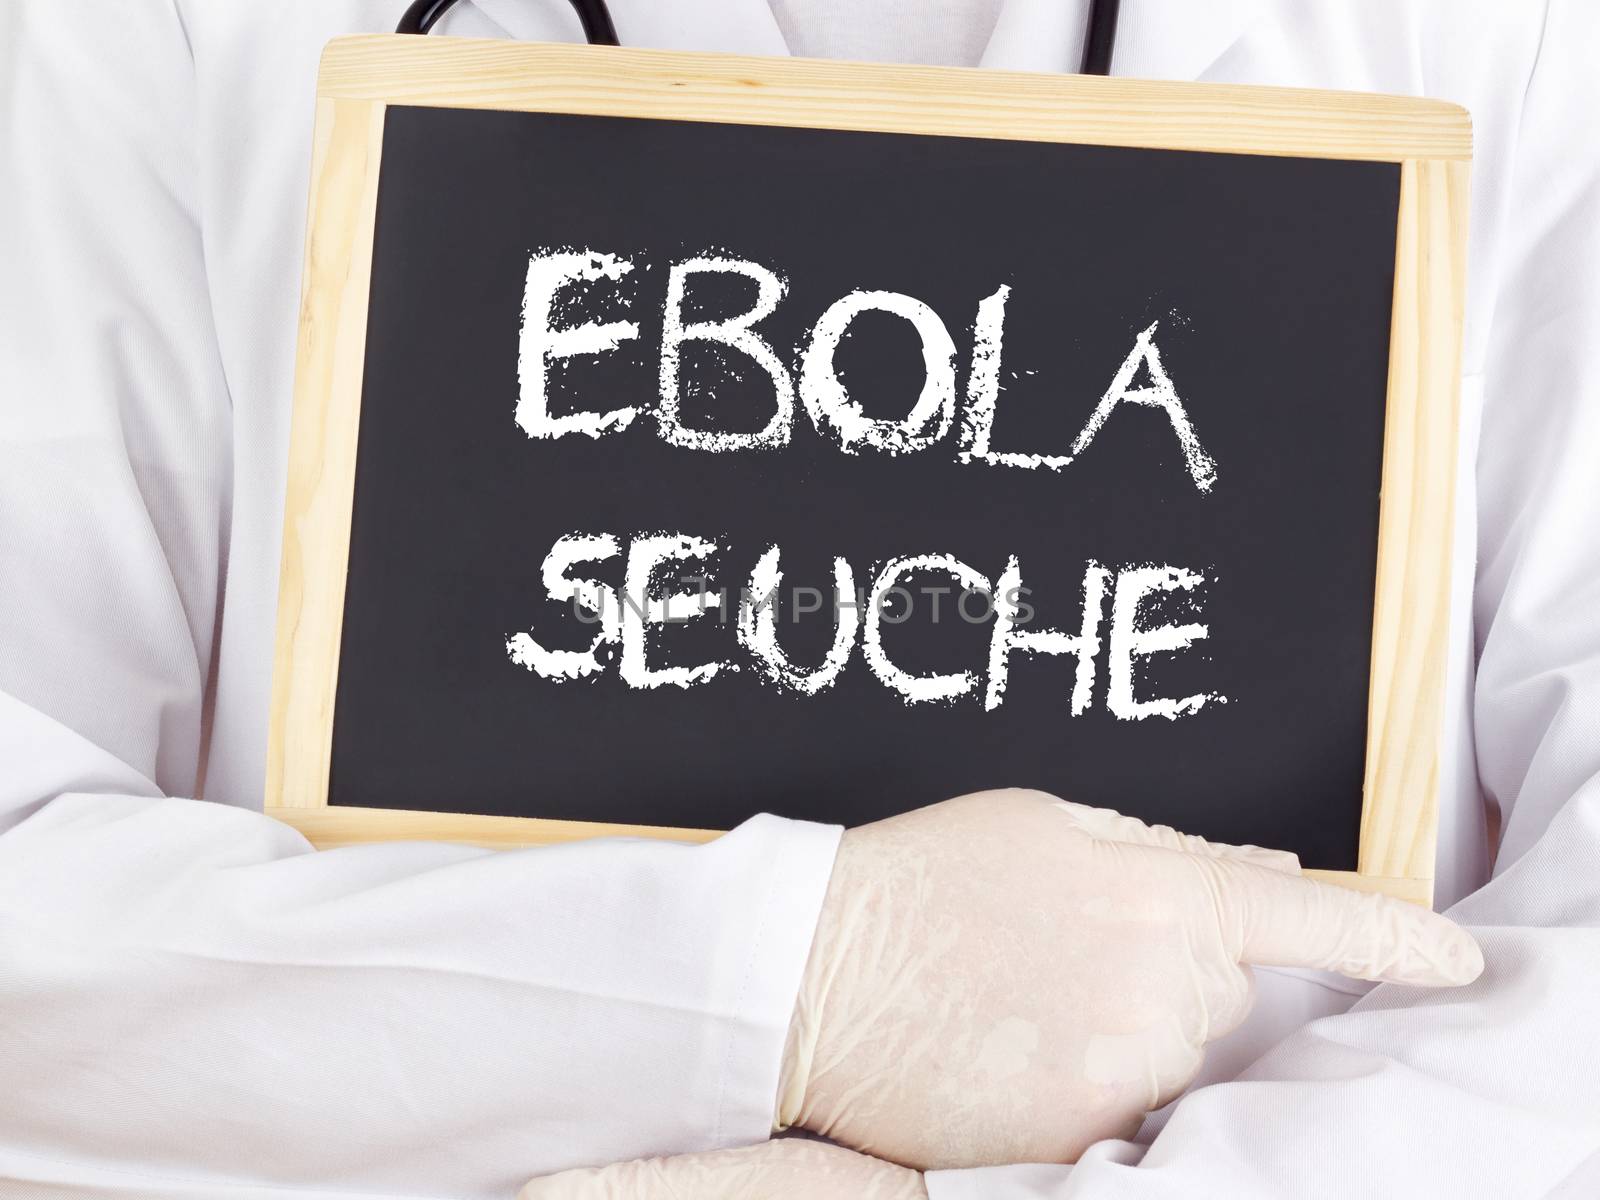 Doctor shows information: Ebola plague in german language by gwolters